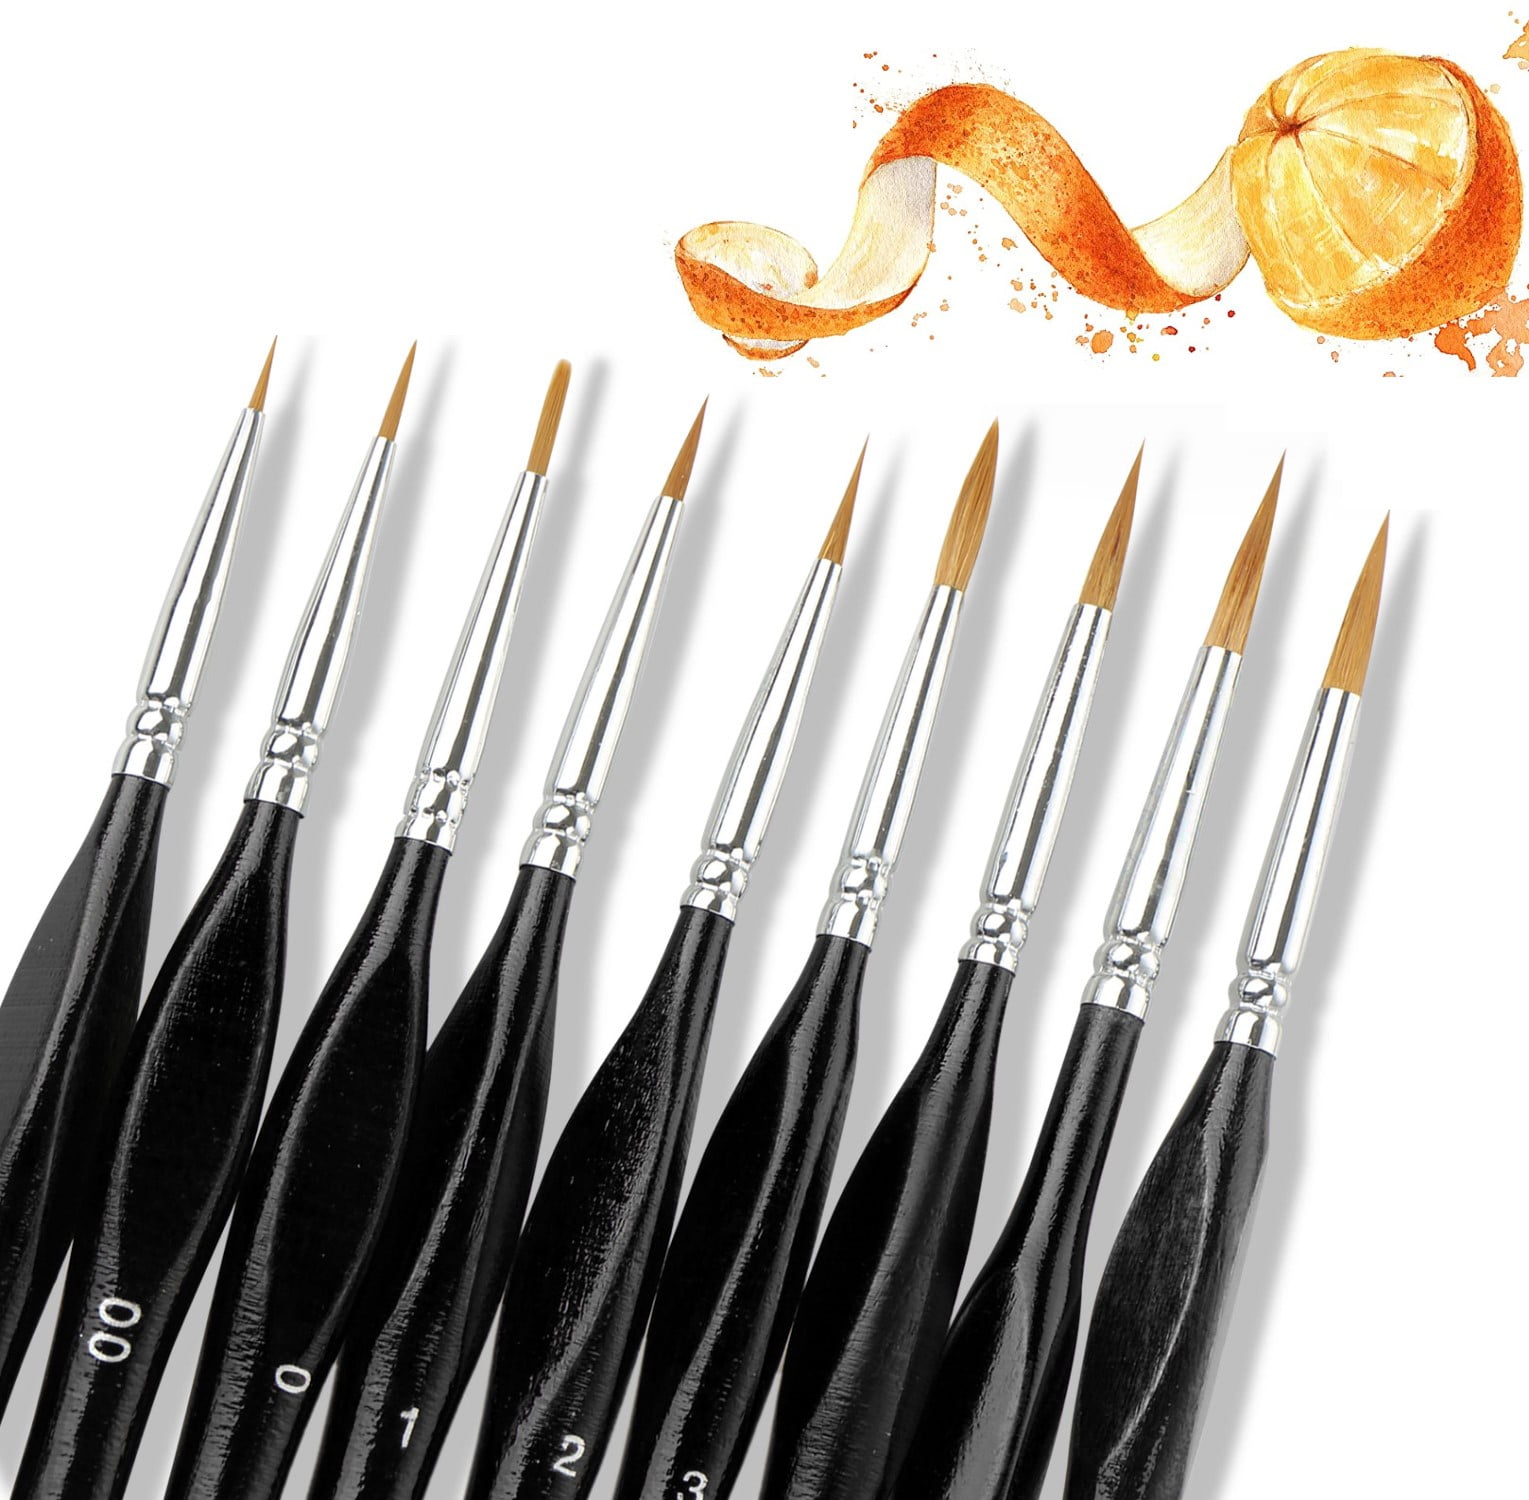 Sable Watercolor Brushes Set 7pcs Professional Round Detail Paint Brush for Water Color Acrylics Ink Gouache Oil Tempera Painting